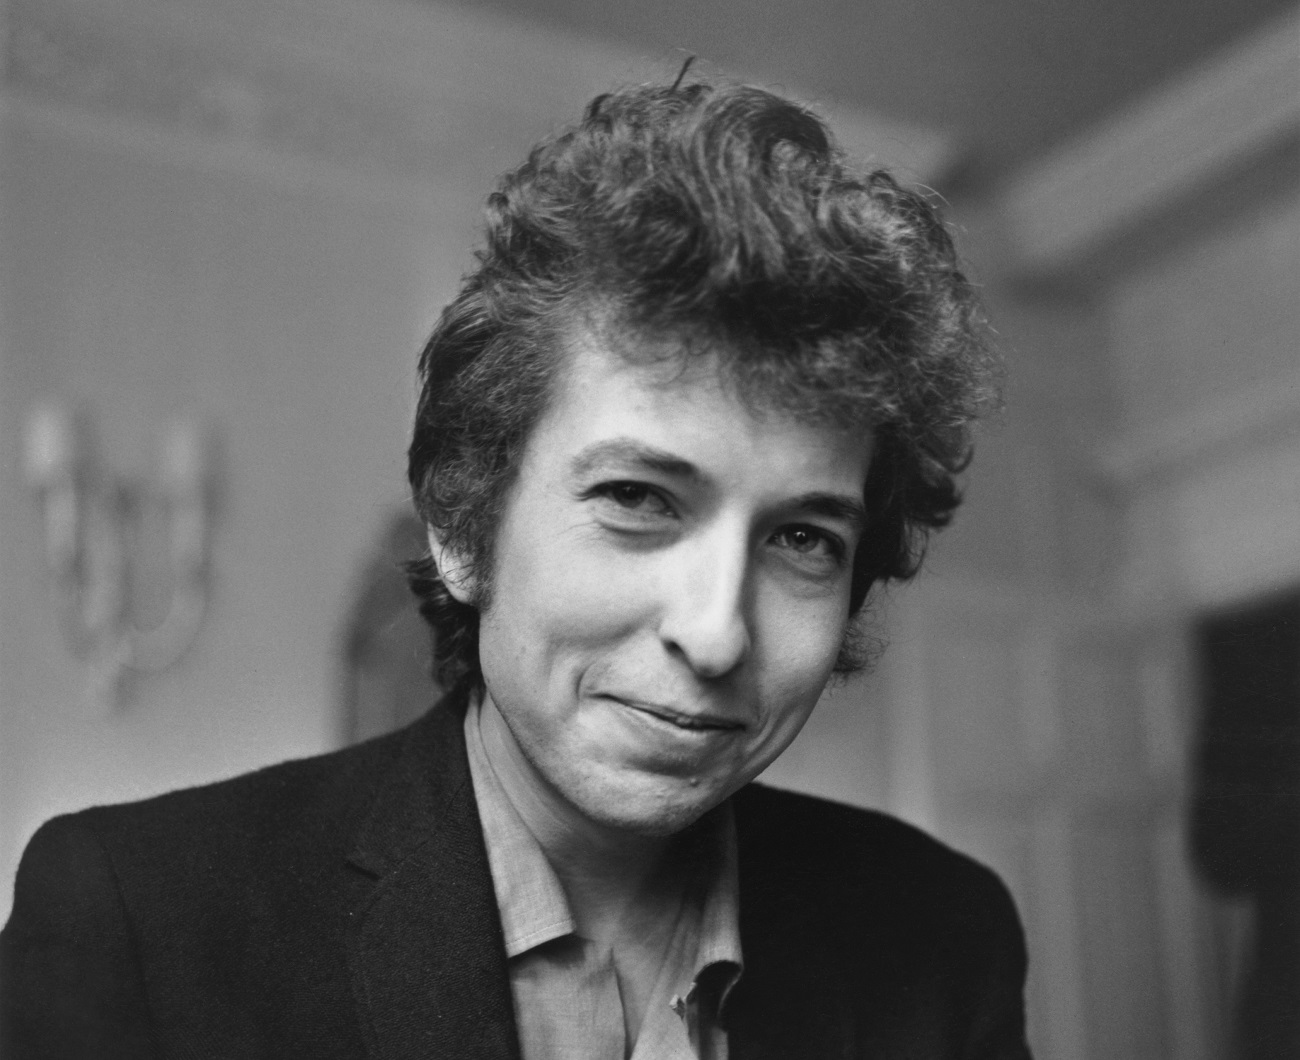 A black and white picture of Bob Dylan smiling.